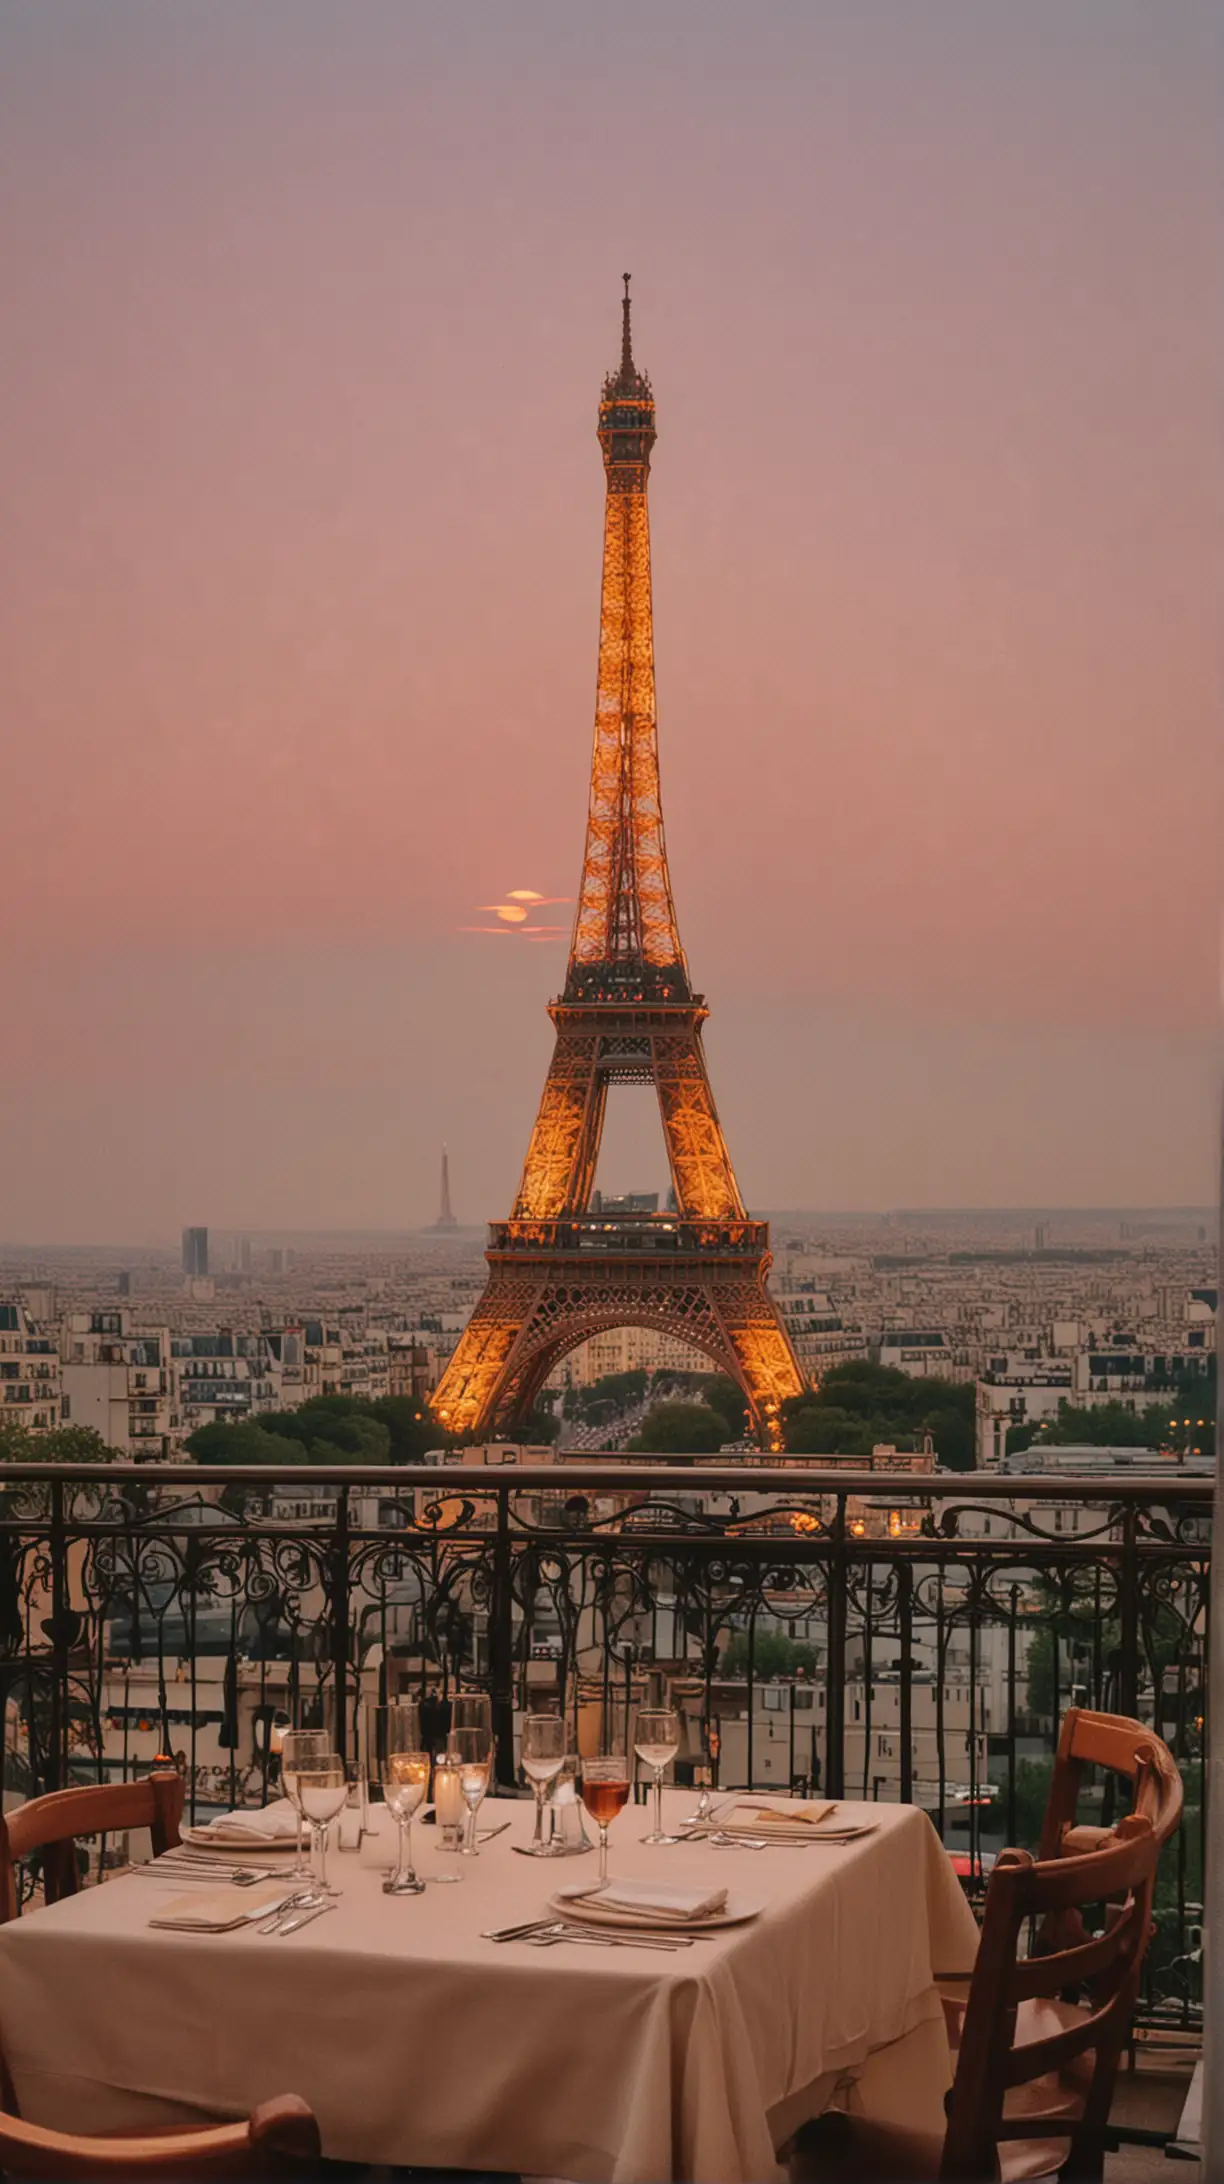 Sunset view on Eiffel Tower from a restaurant in the 80s